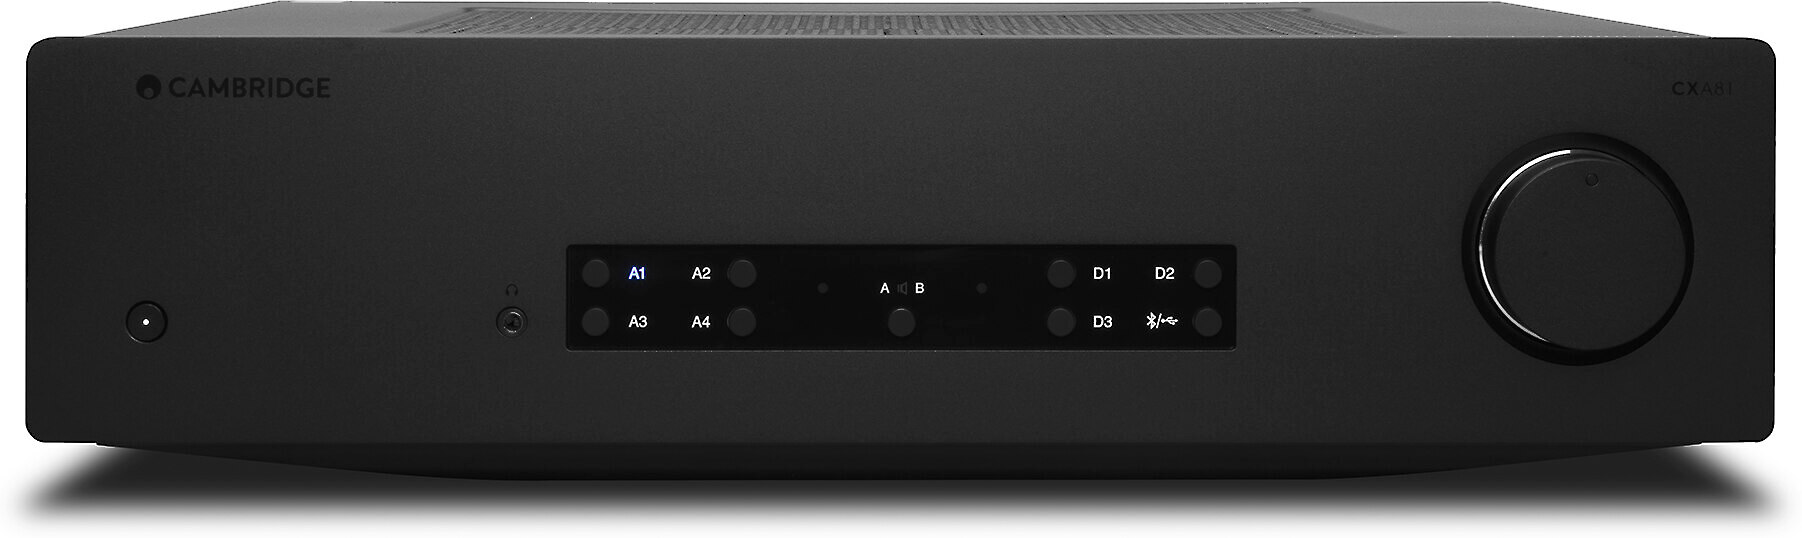 Customer Reviews Cambridge Audio CXA81 (Black) Stereo integrated amplifier with built-in DAC and Bluetooth® at Crutchfield